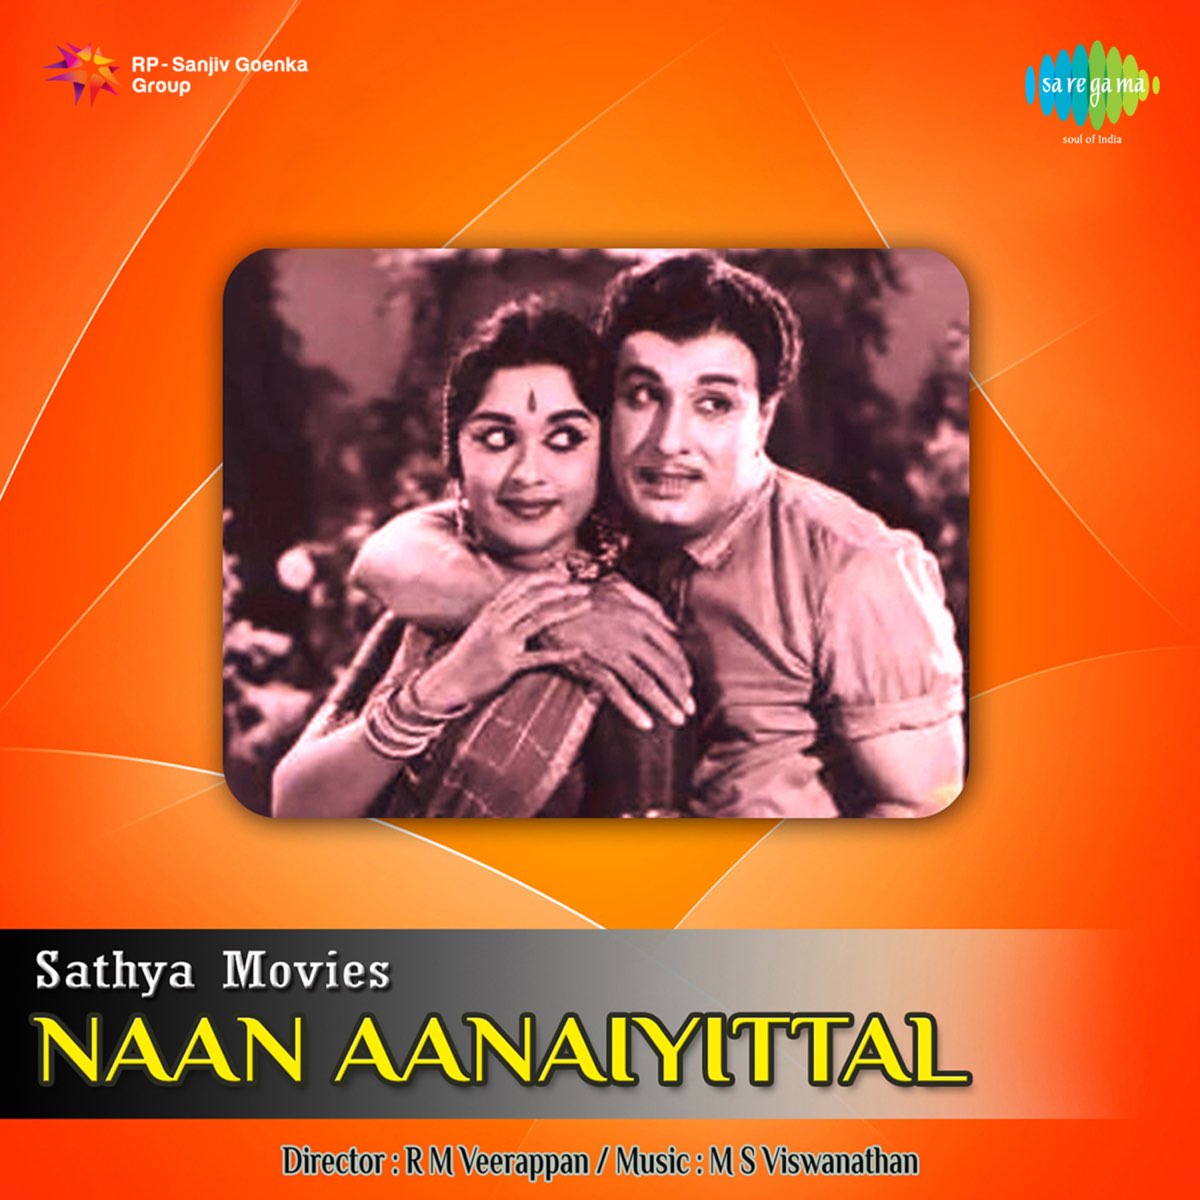 Naan Aanaiyittal (Original Motion Picture Soundtrack) by M. S. Viswanathan  on Apple Music